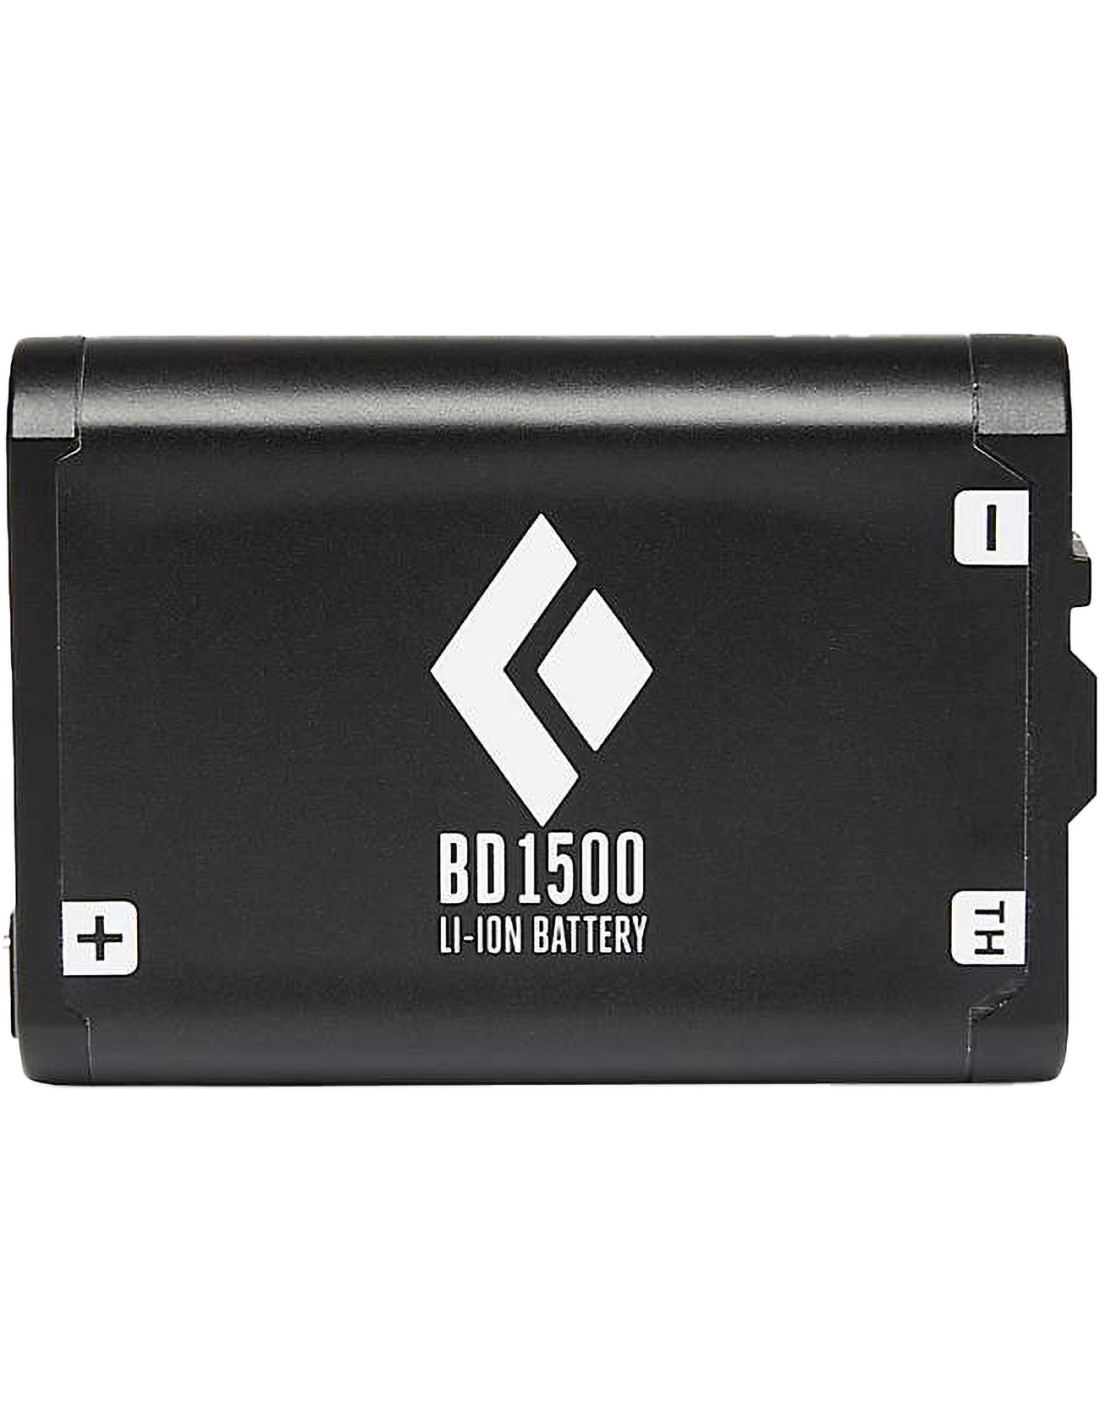 BD 1500 BATTERY & CHARGER